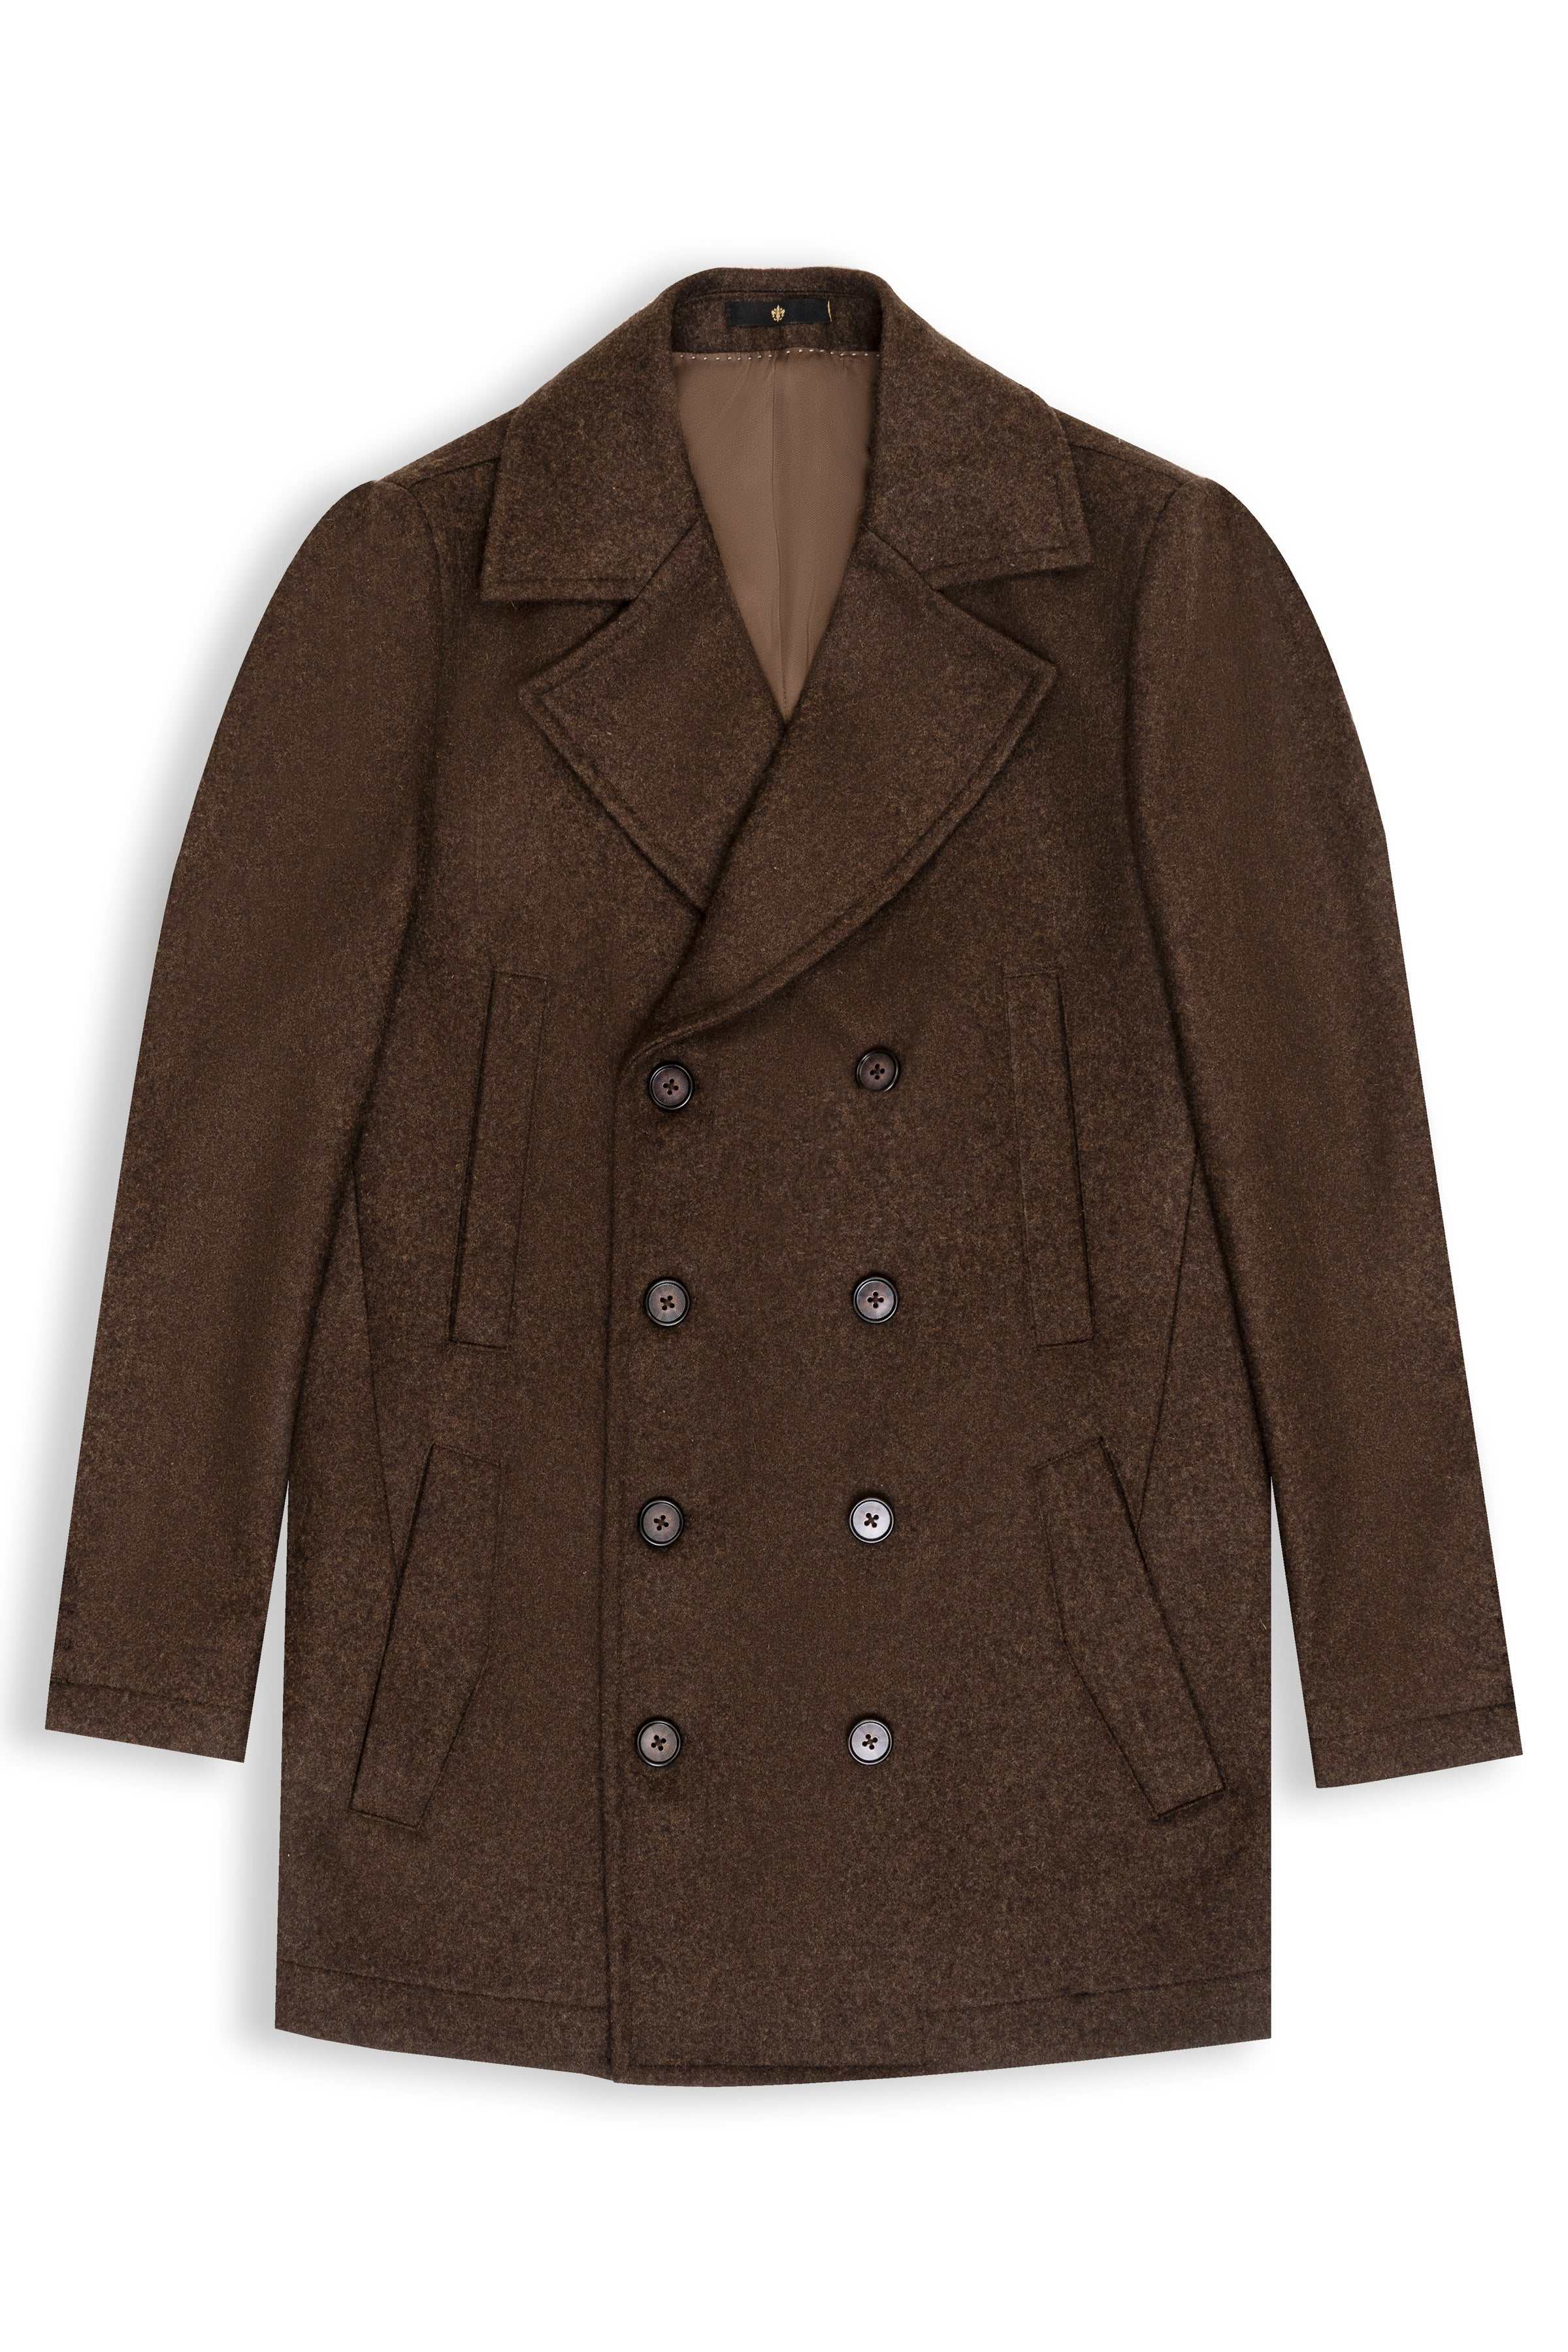 WOOLEN LONG COAT DOUBLE BREASTED  DARK BROWN at Charcoal Clothing